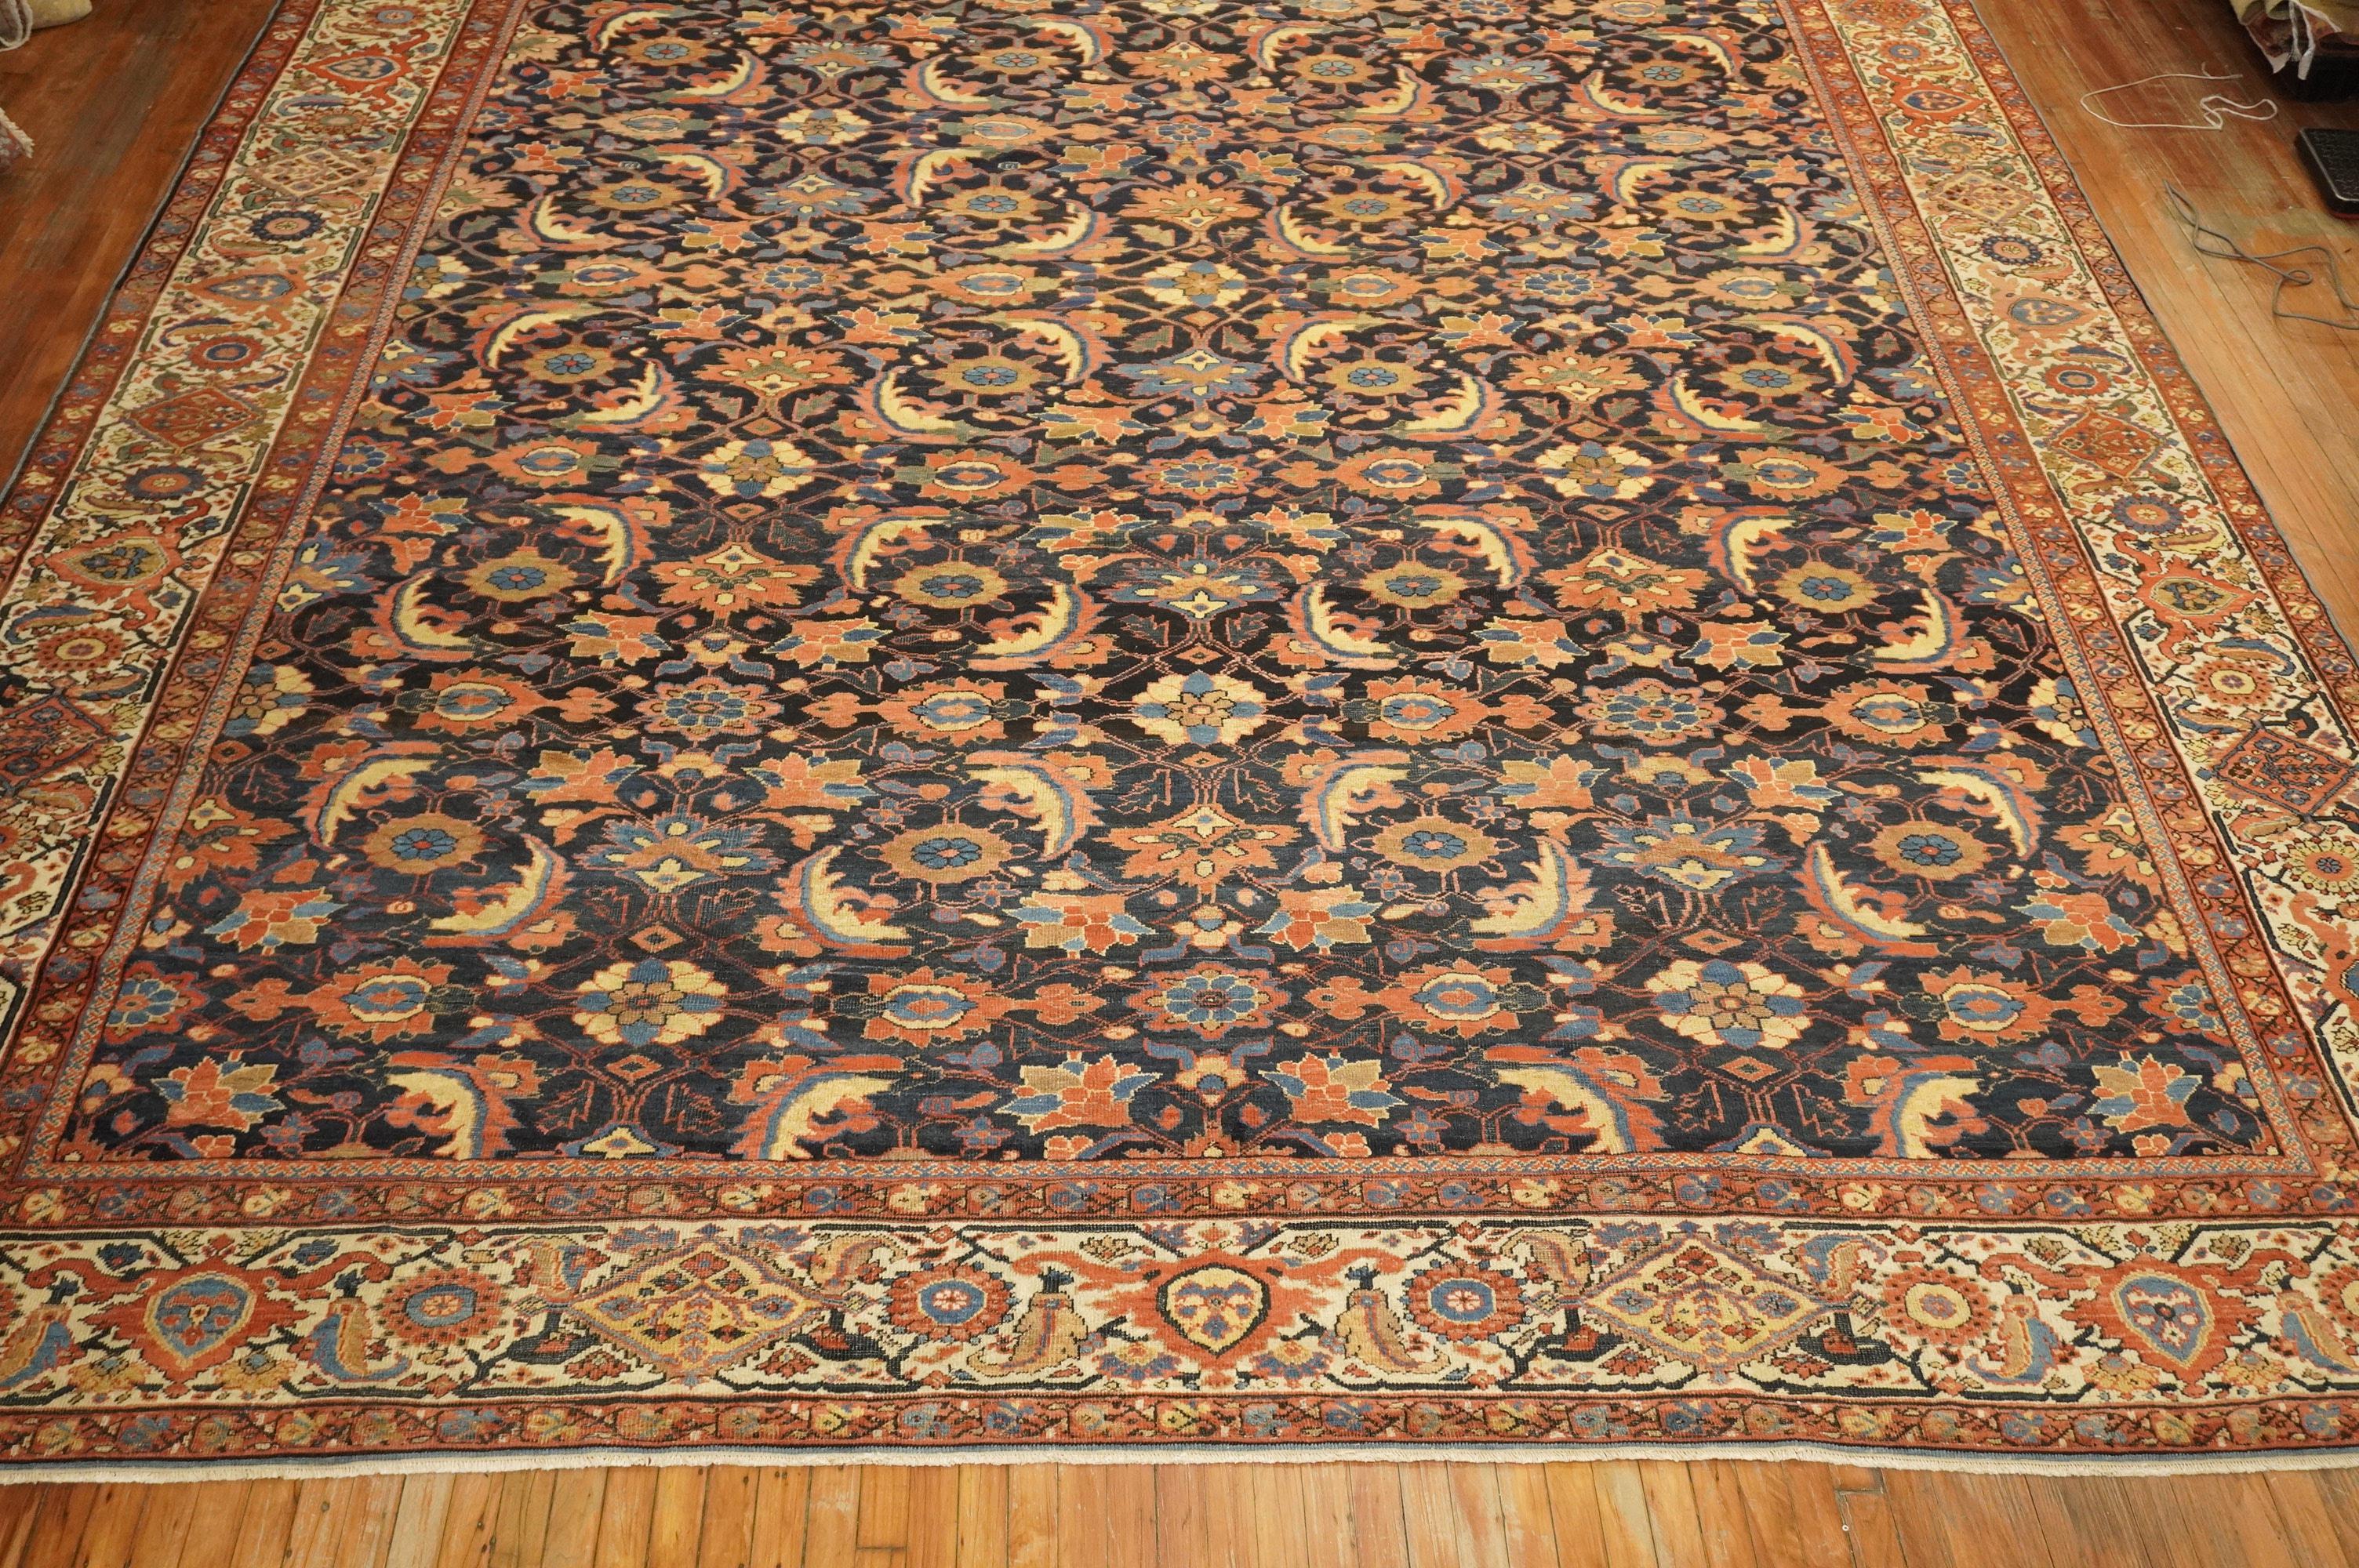 Masculine Large Antique Persian Mahal Sultanabad Rug, Early 20th Century For Sale 6